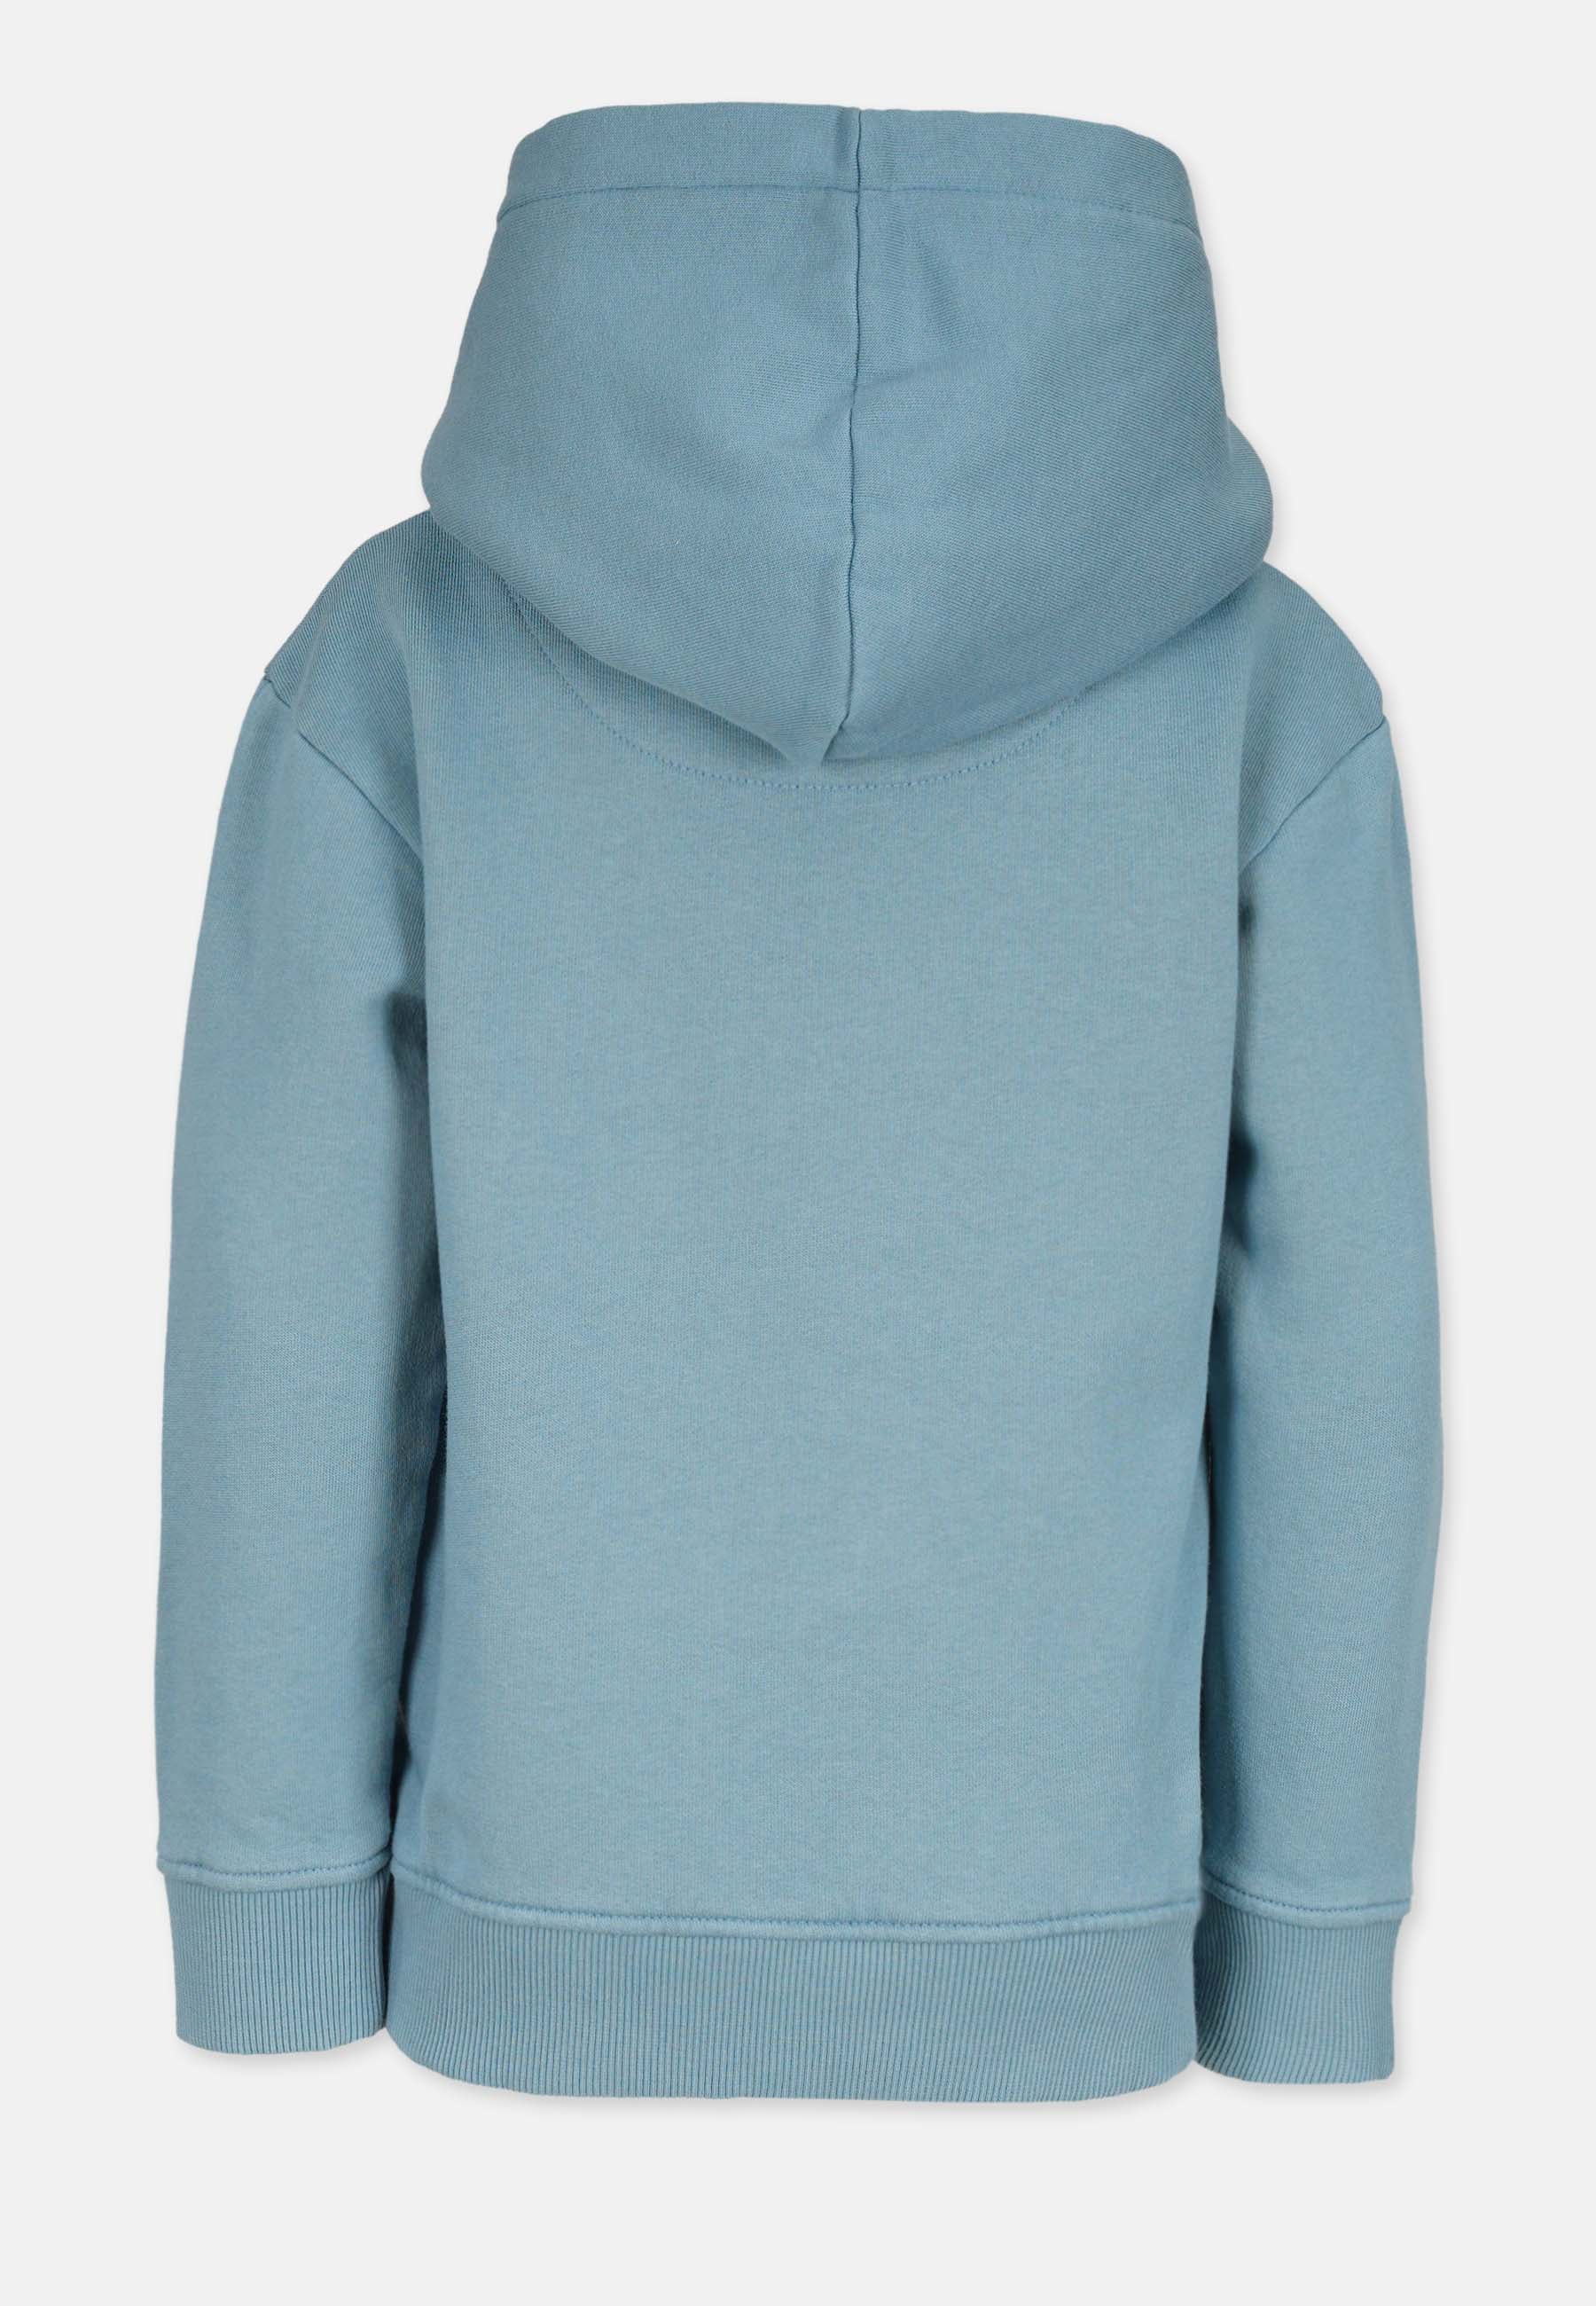 Too Cool for School Hooded